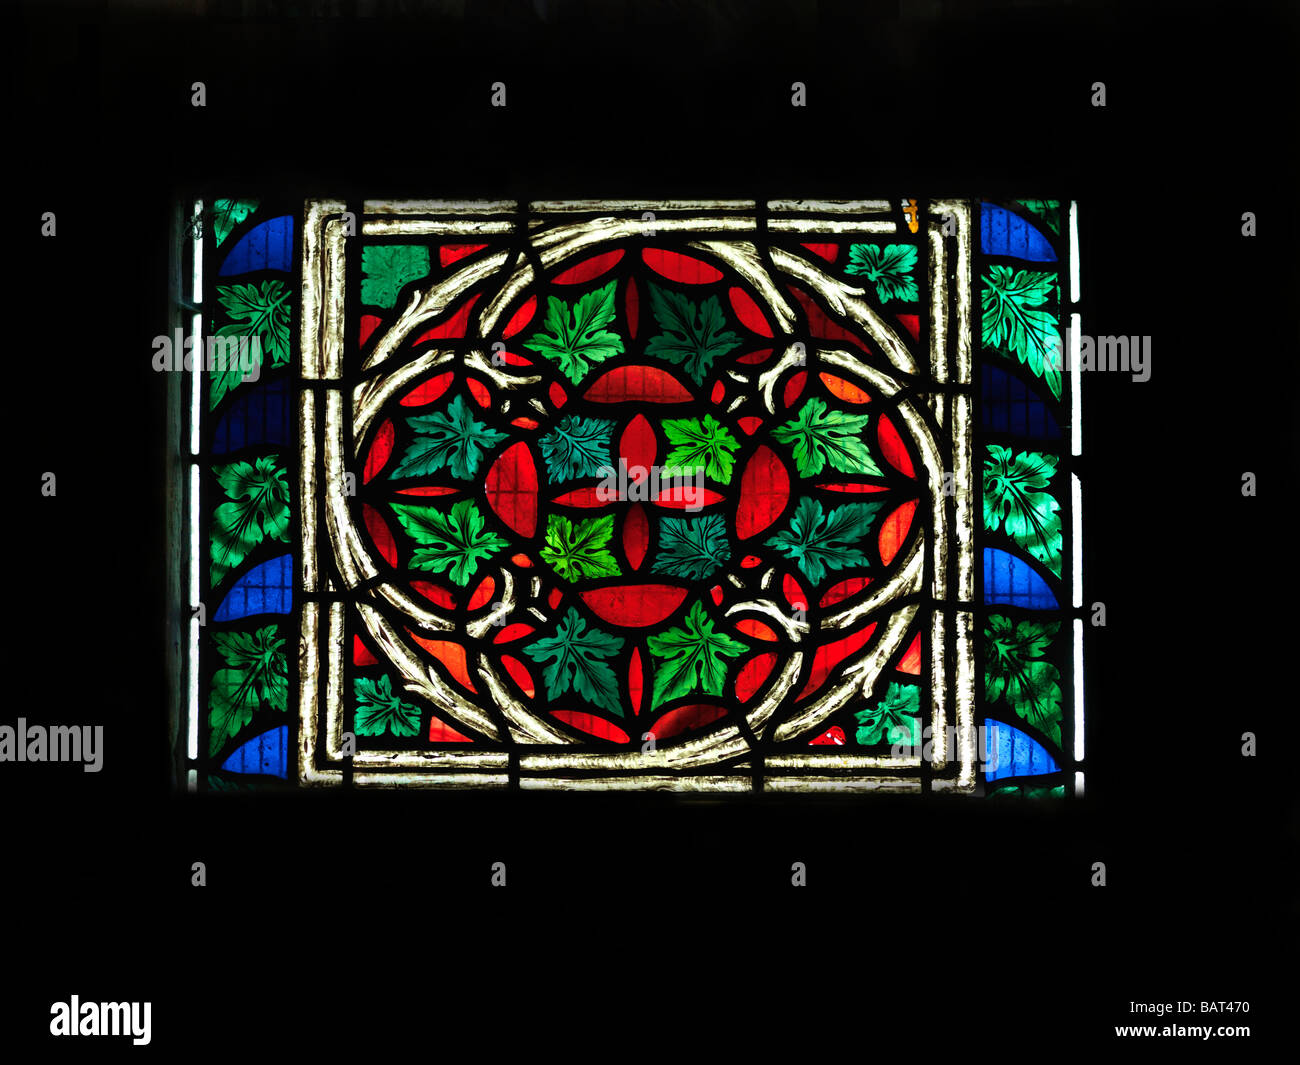 Parish Church of St Peter Walton on the Hill Surrey England Stained Glass Window and Vine and Leaves Stock Photo